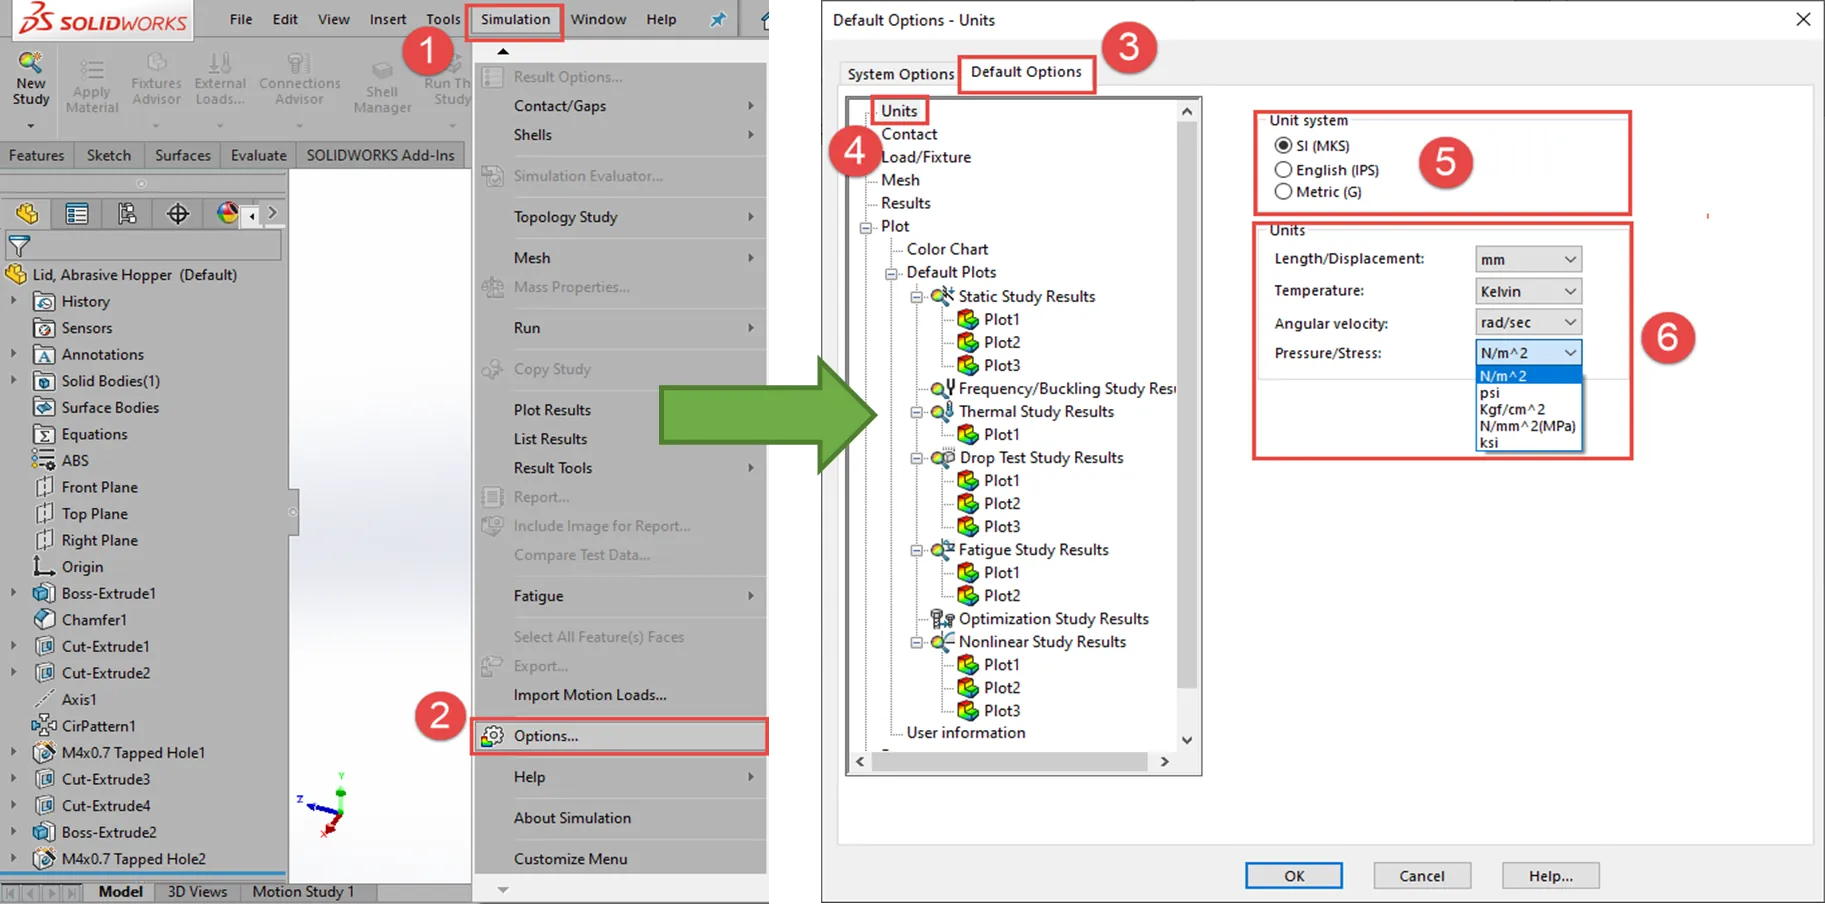 Pathway to change units in SOLIDWORKS Simulation Default Options